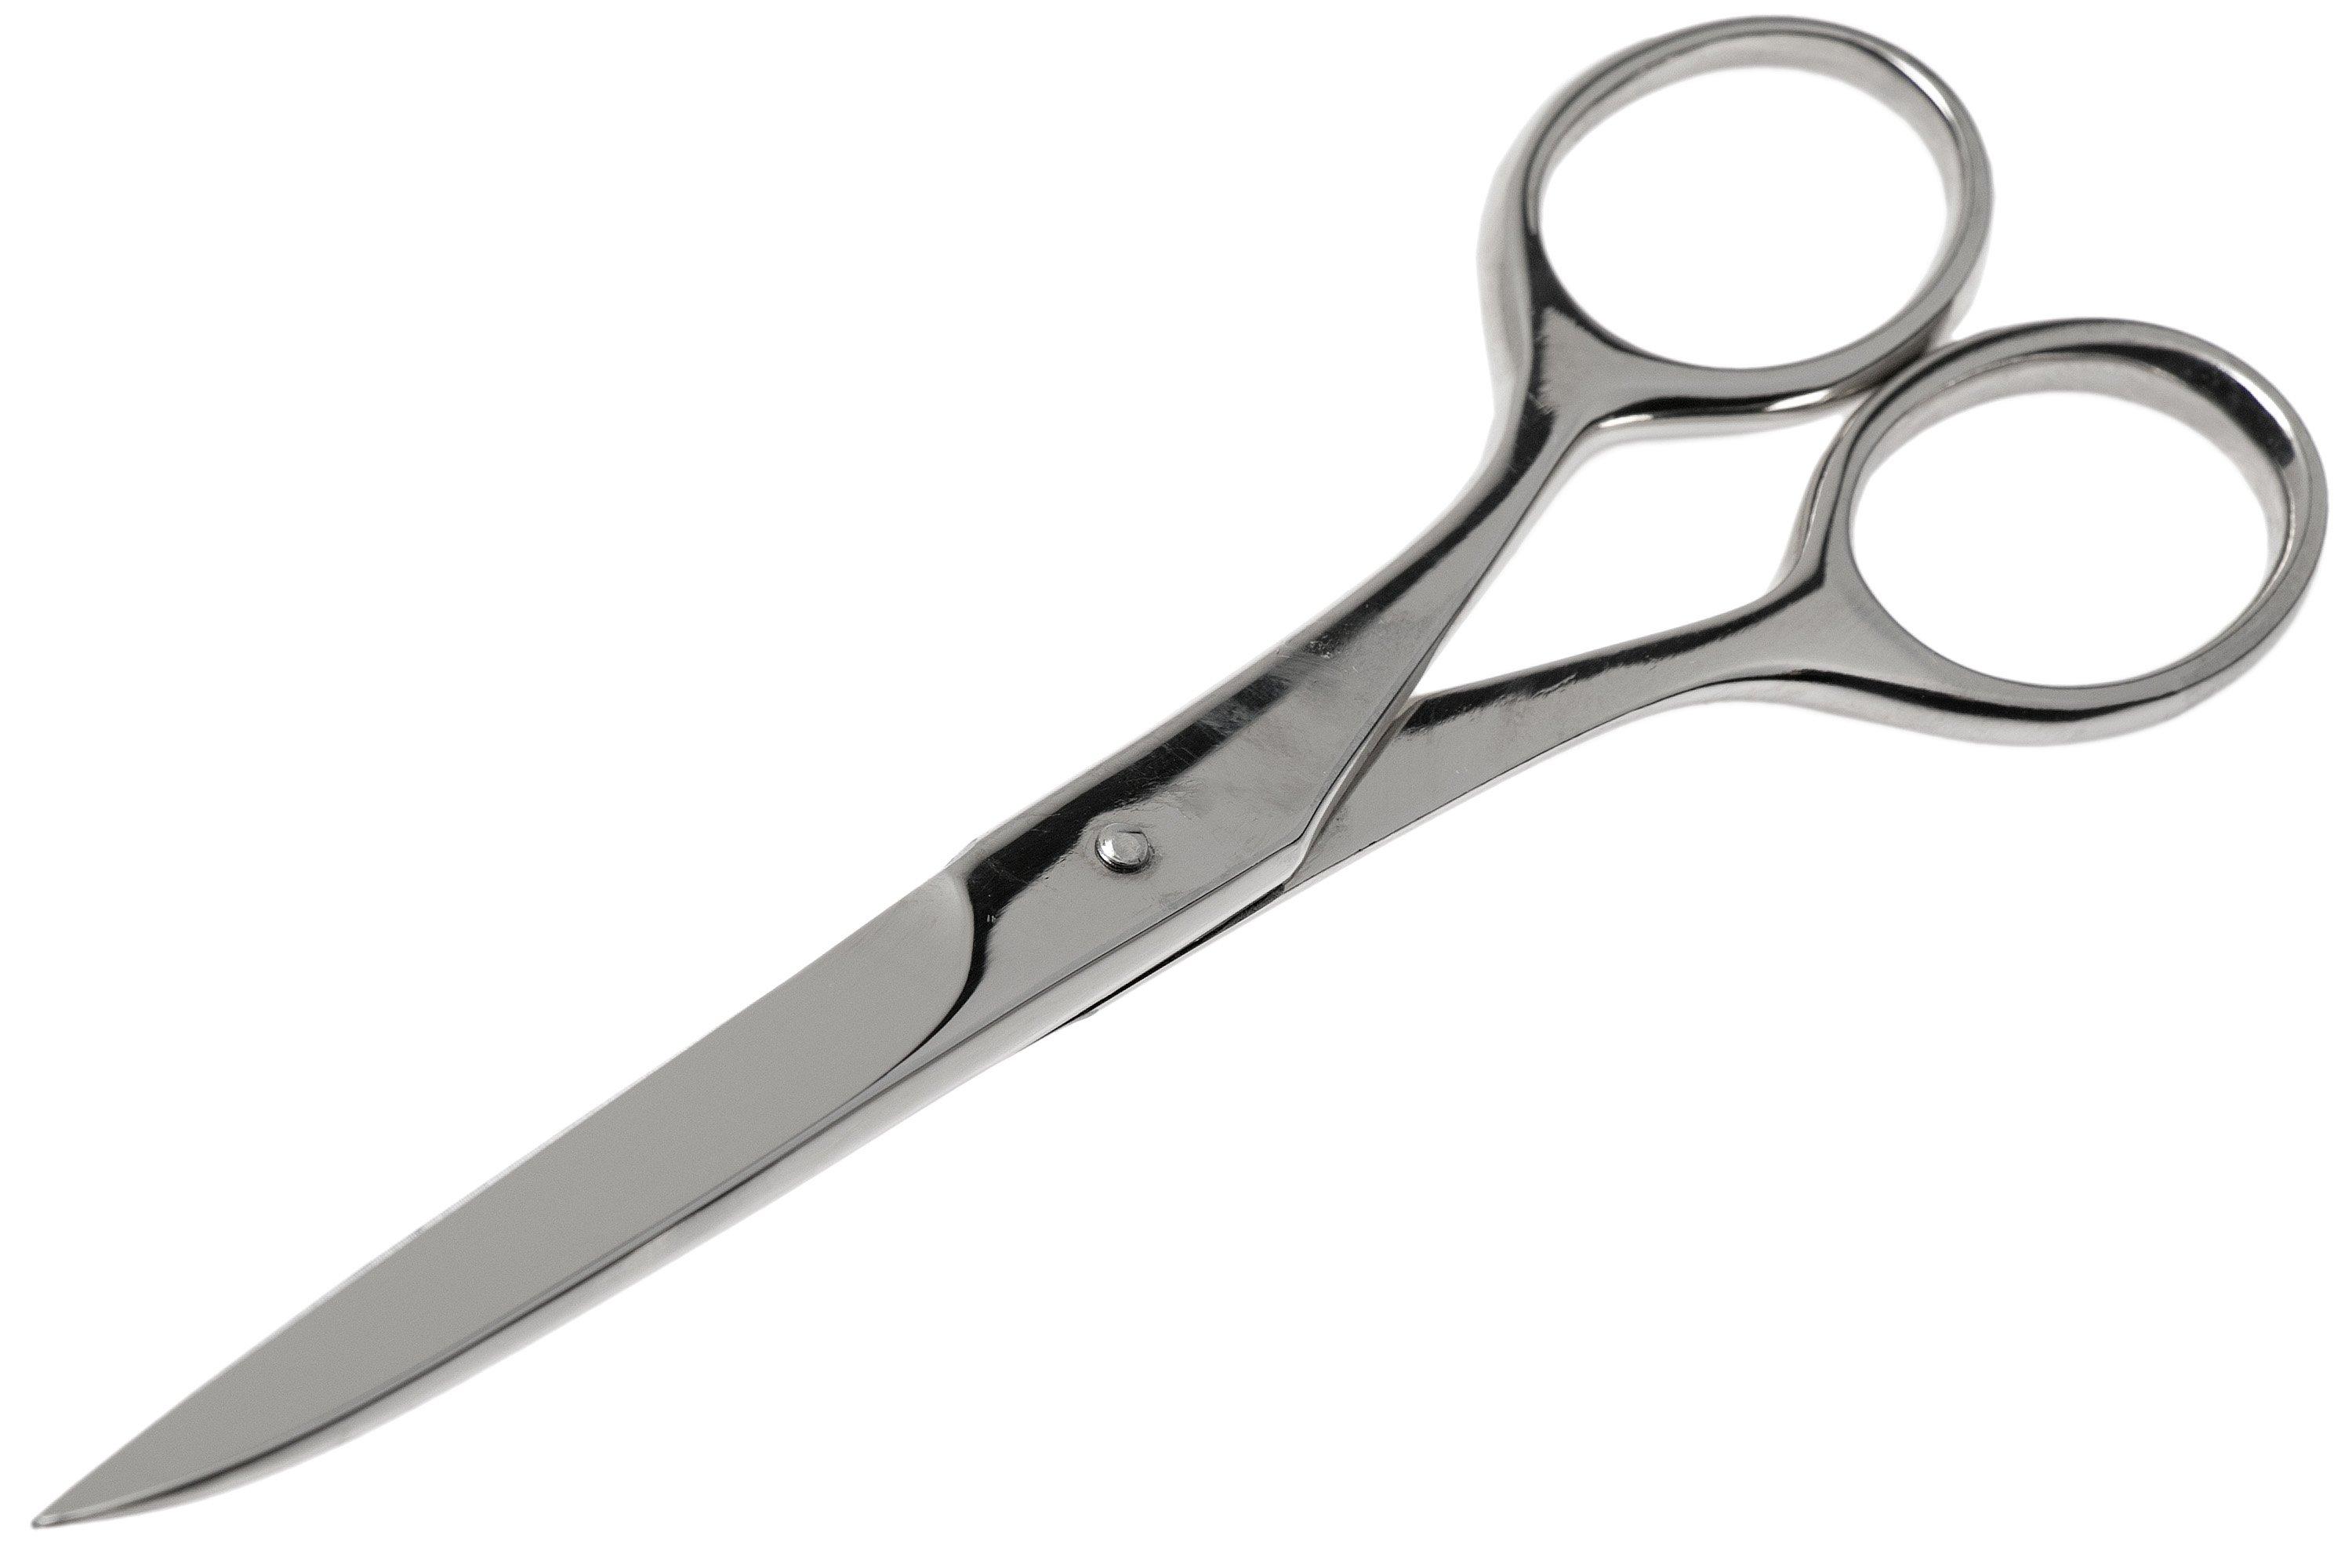 cm | household 8.1016.15, Sweden scissors Victorinox at Advantageously shopping 15